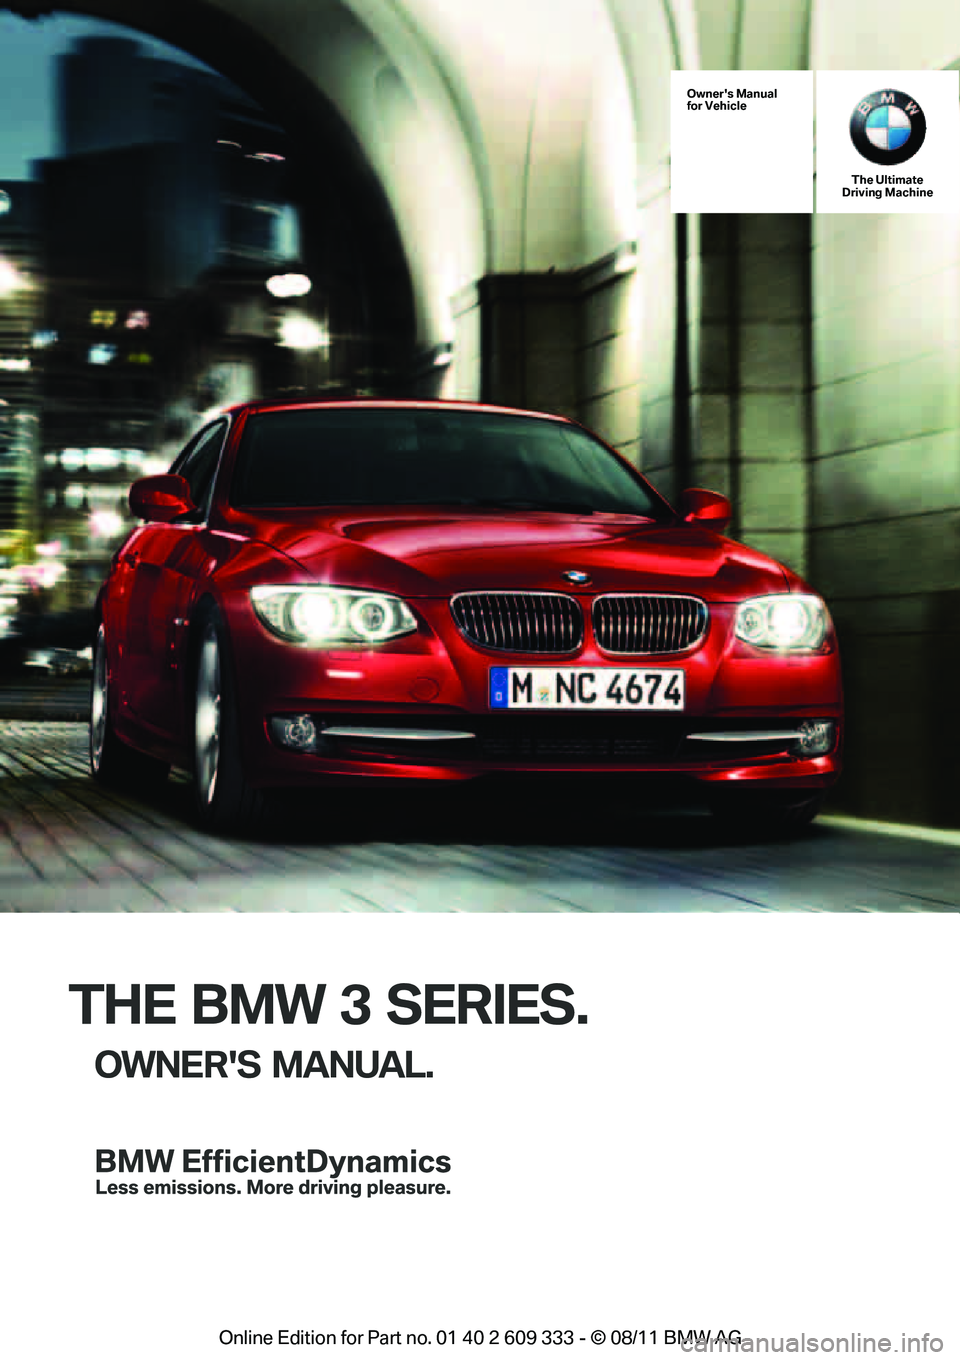 BMW 328I COUPE 2012  Owners Manual THE BMW 3 SERIES.
OWNERS MANUAL.
Owners Manual
for VehicleThe Ultimate
Driving Machine
Online  Edition  for Part  no. 01 40 2 609  333 - \251  08/11  BMW AG  